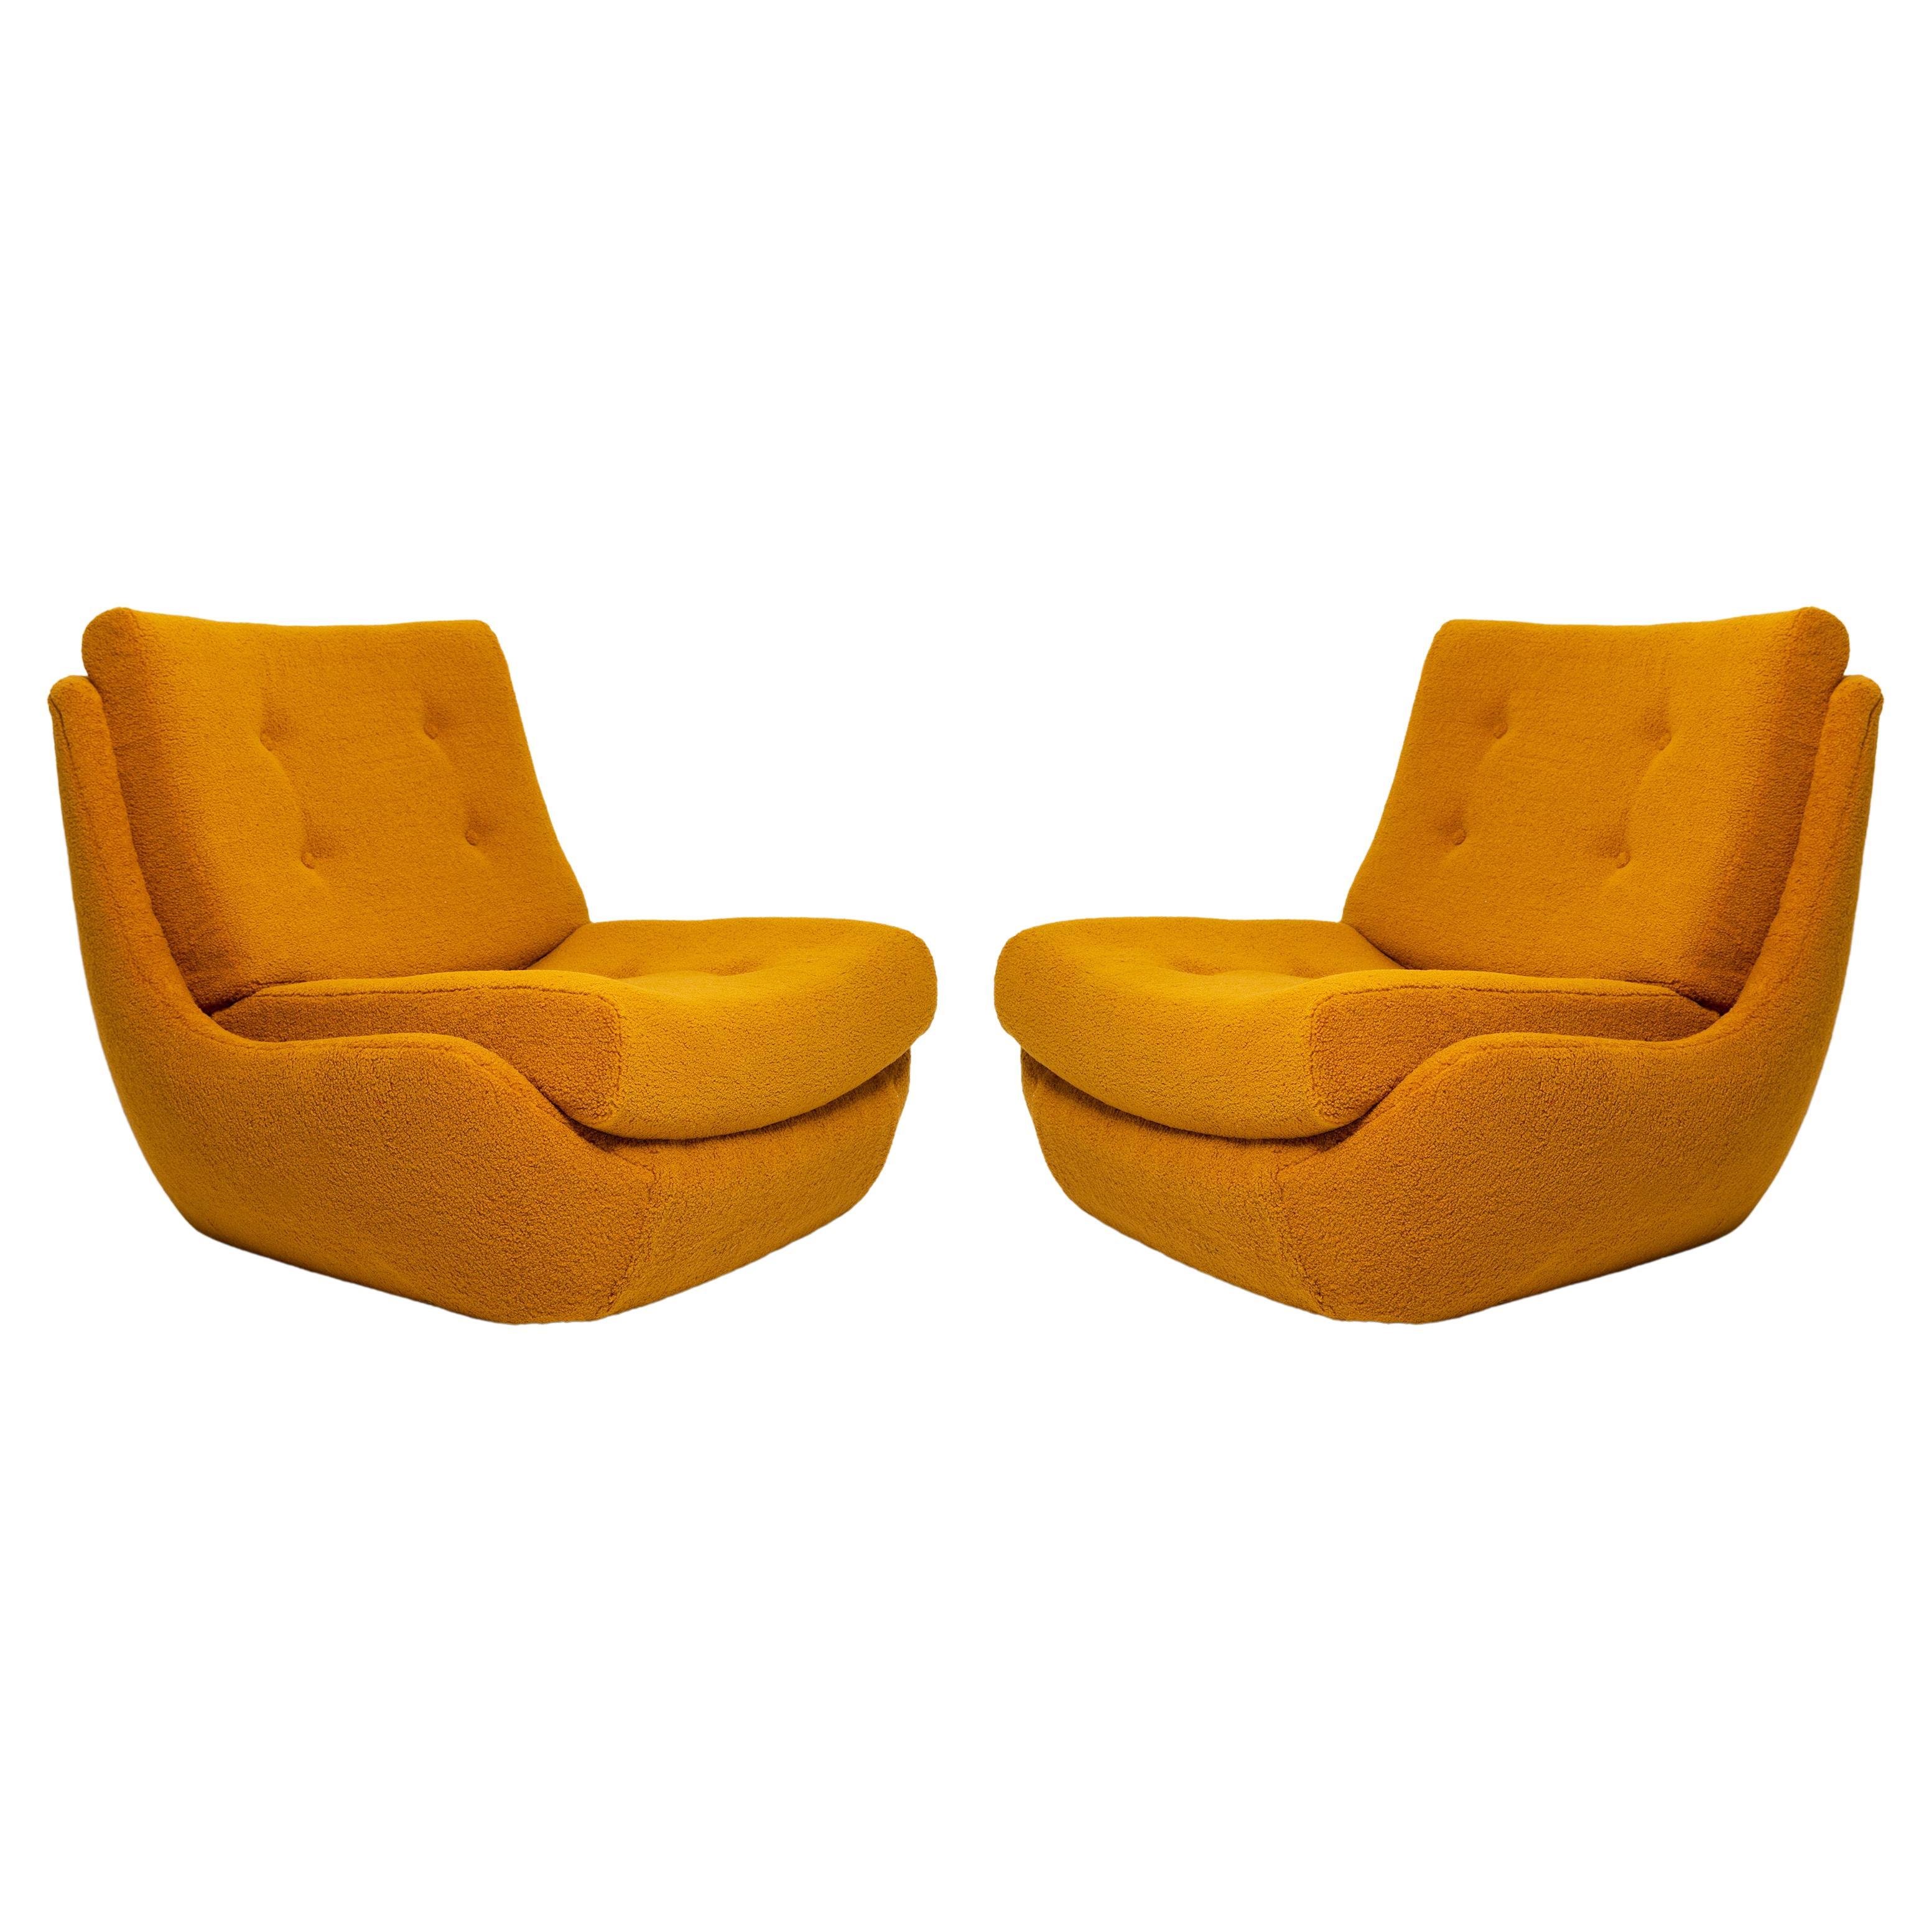 Pair of Mid Century Vintage Ochre Yellow Boucle Atlantis Big Armchairs, 1960s For Sale